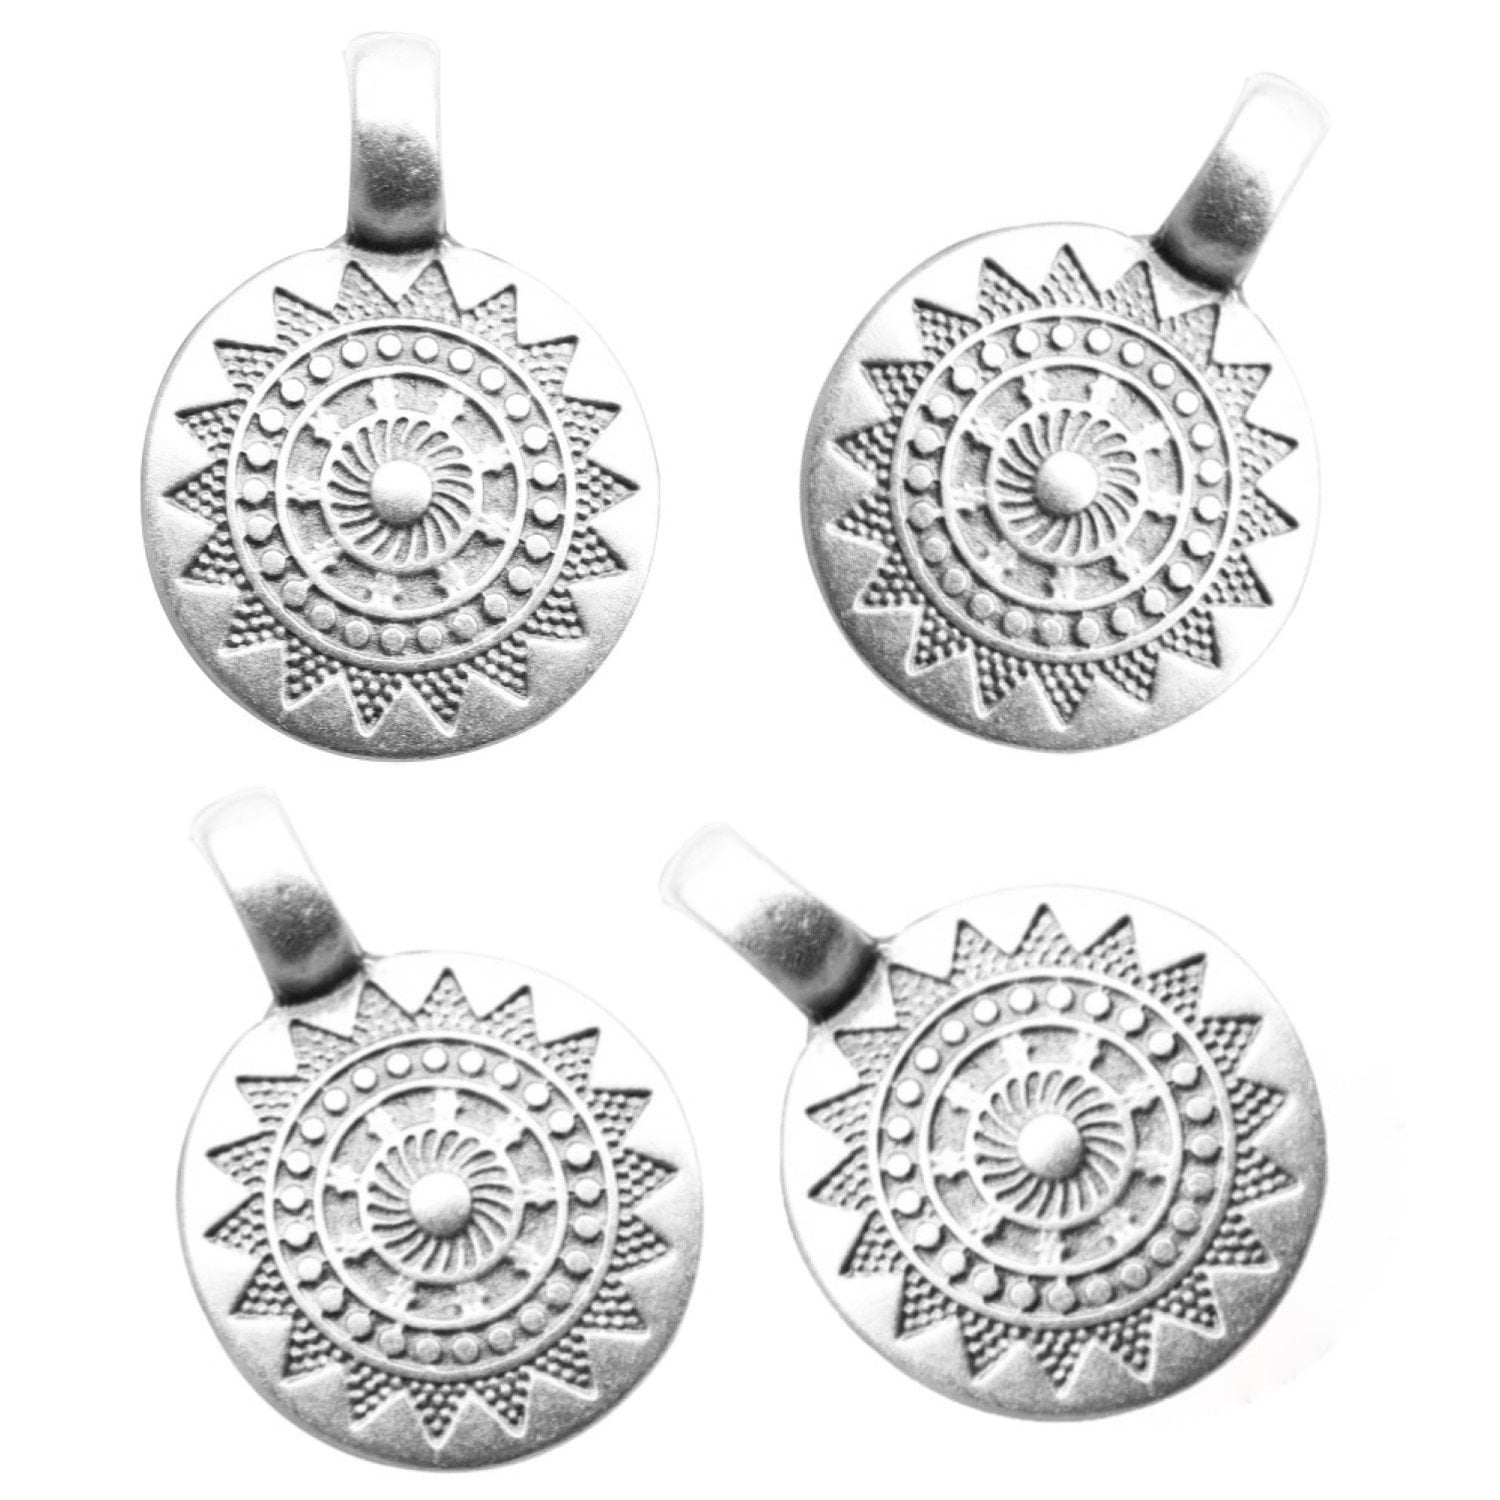 20 Mandala Charms 1 to 5 Earring Connectors Silver Flat Metal Jewelry Components